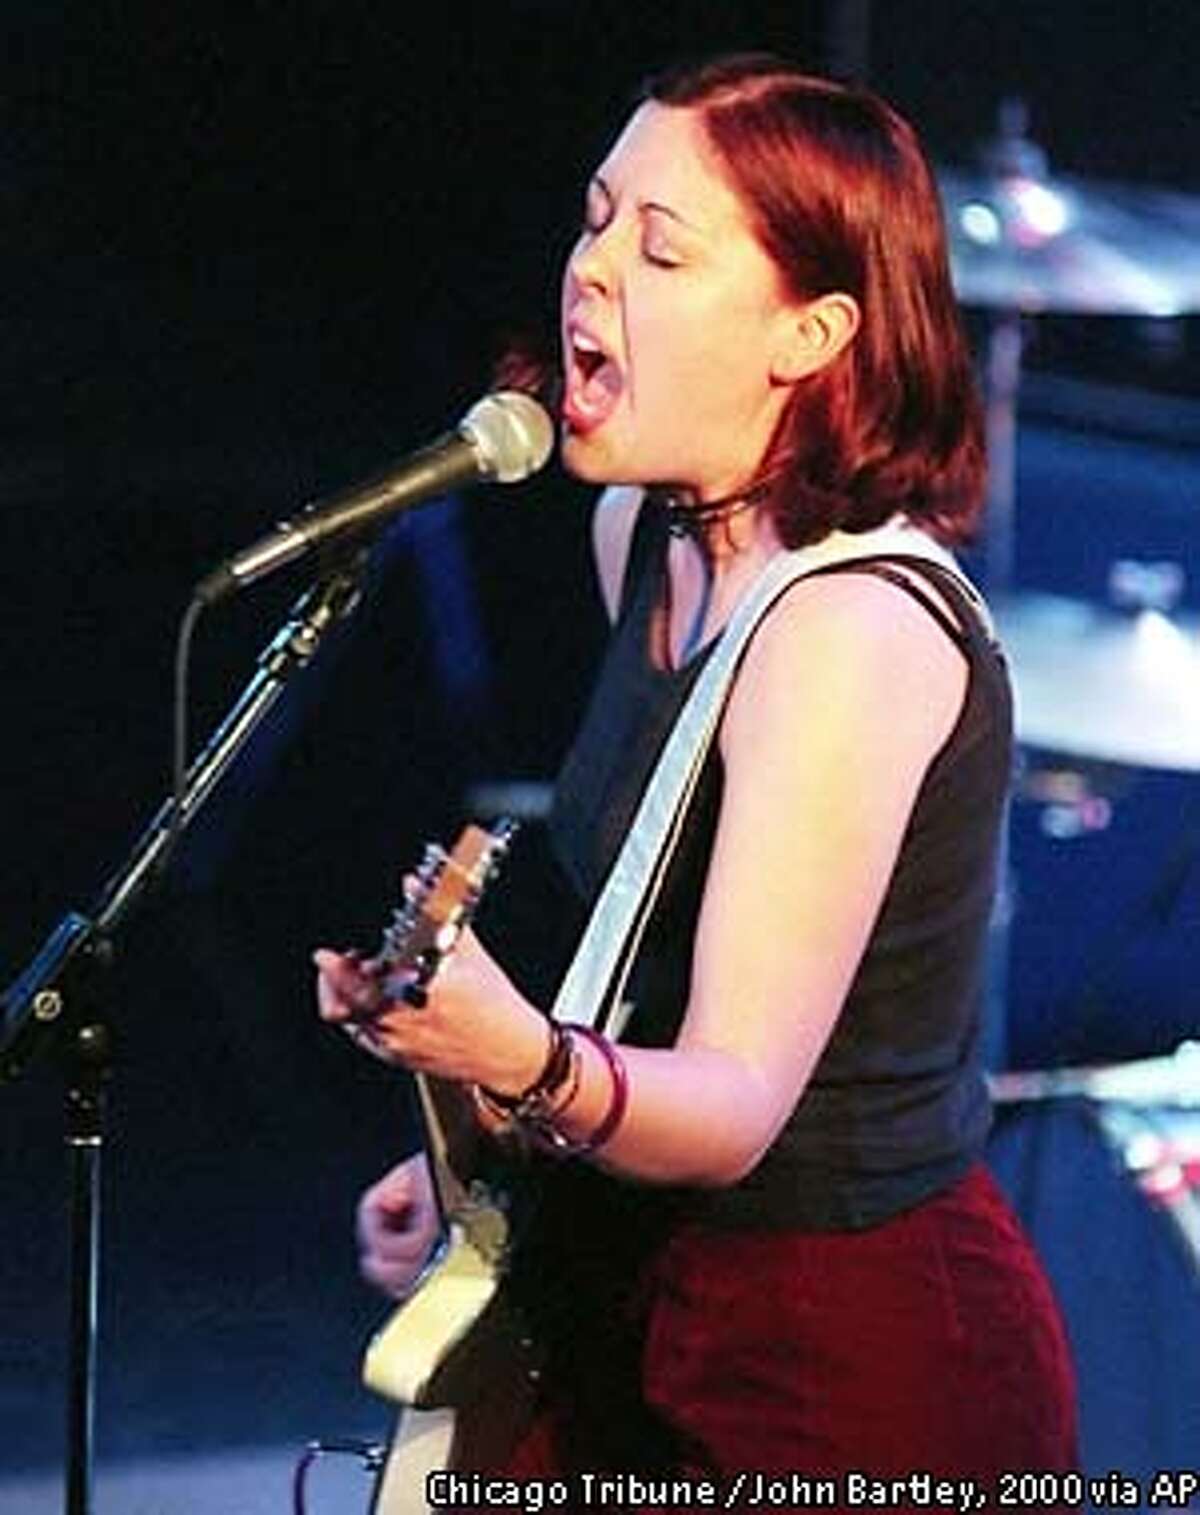 Guitarist Corin Tucker, a member of the all-girl punk-rock band Sleater-Kinney, performs at the Metro during the Noise Pop music festival in Chicago May 12, 2000. Tucker, along with Carrie Brownstein on guitar and Janet Weiss on drums, are among more than 50 bands that played to packed rooms in smaller clubs on the city's north side. Noise Pop, a fixture in San Francisco for the past eight years, finally left its nest for the first time to play at Chicago venues. (AP Photo/Chicago Tribune, John Bartley)